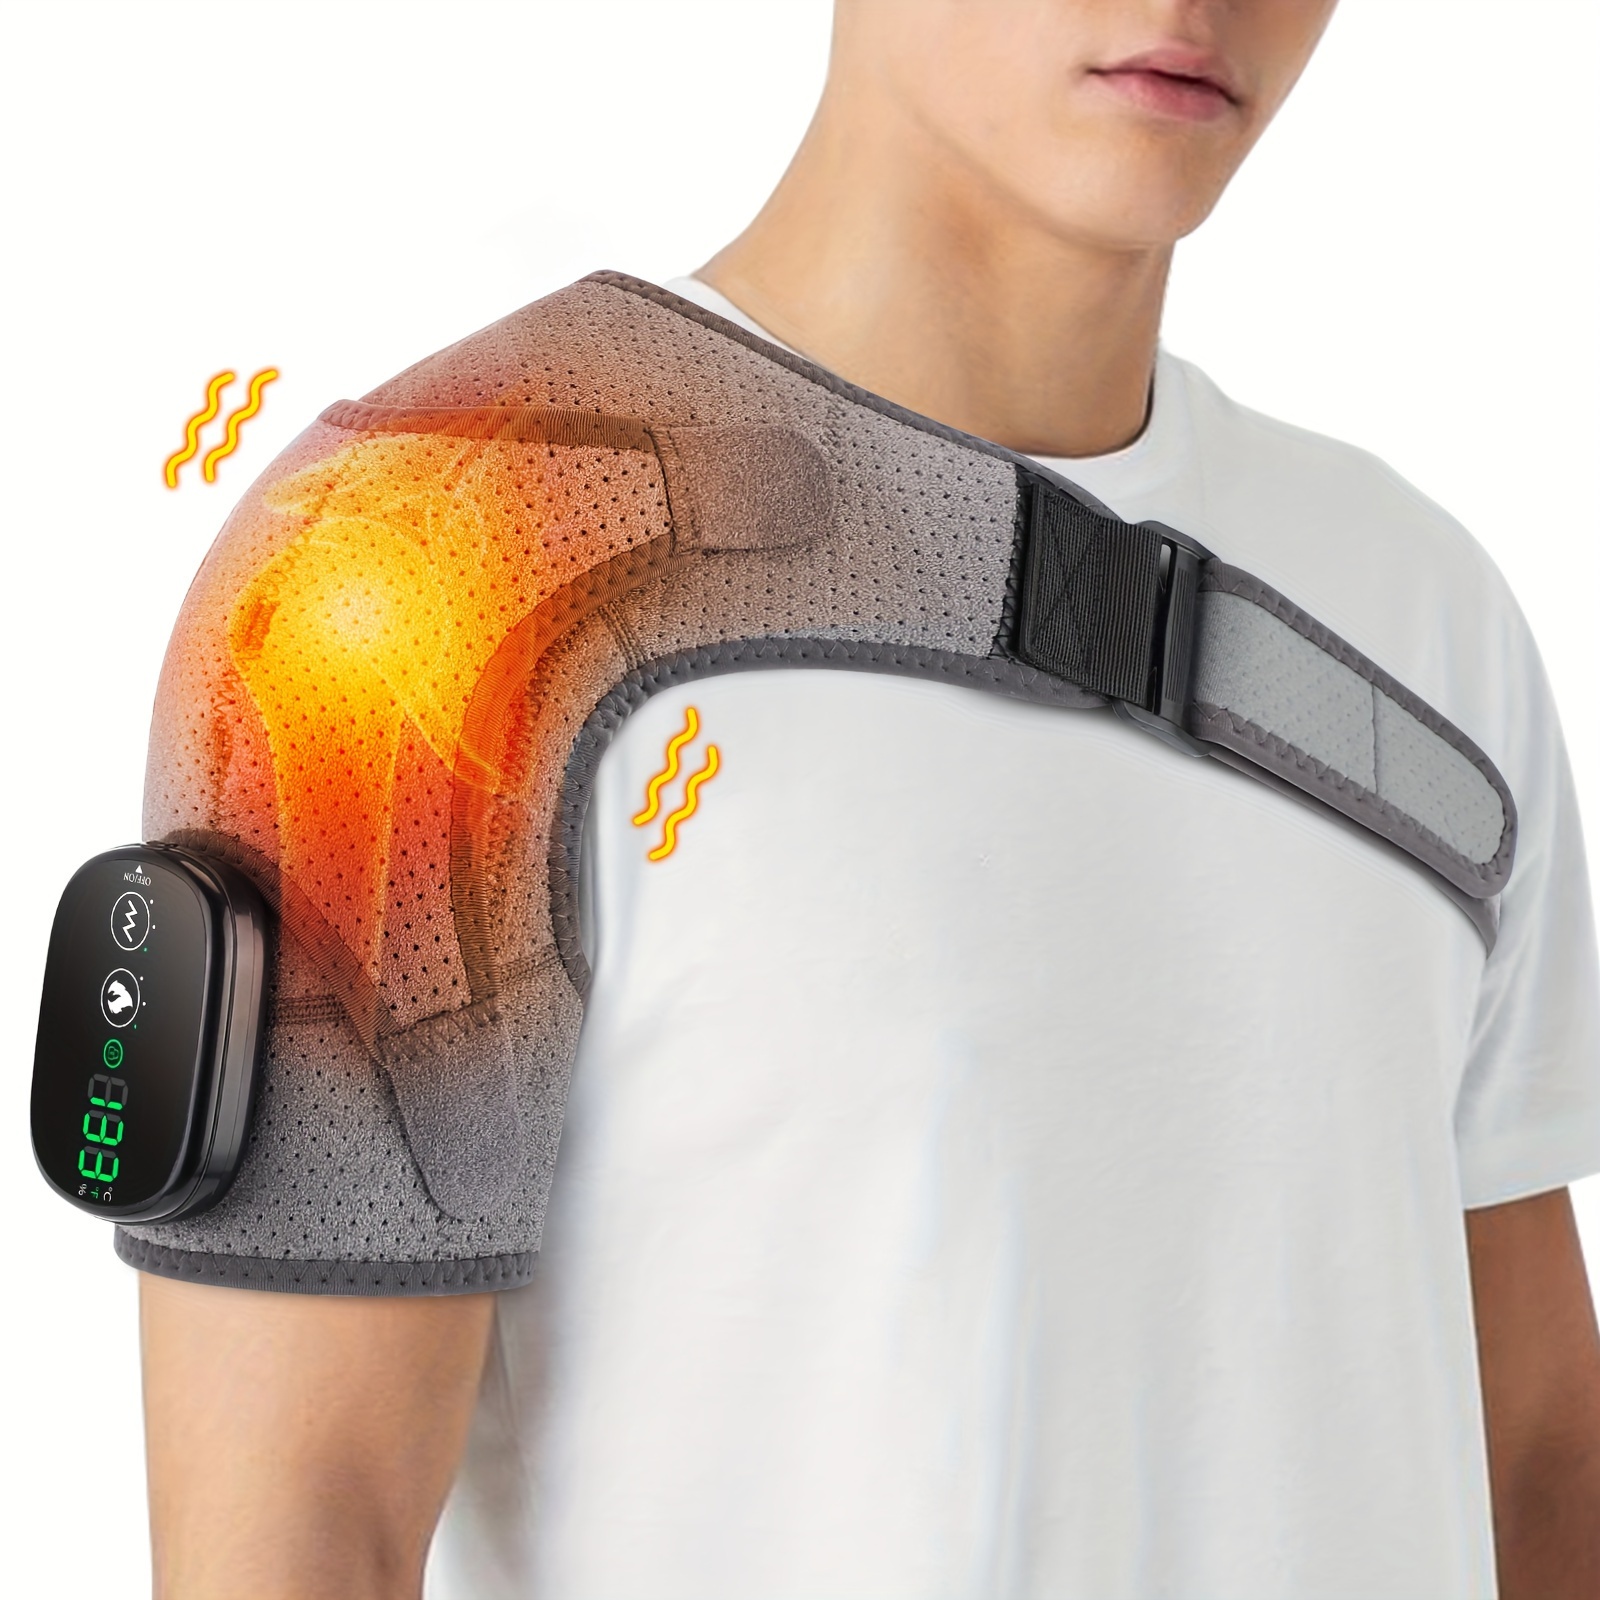 Heated Shoulder Wrap for Men Women, Upgrade Electric Heating Pad Massager  with 3 Vibration and Heat Settings and Timer, Shoulder Braces for Rotator